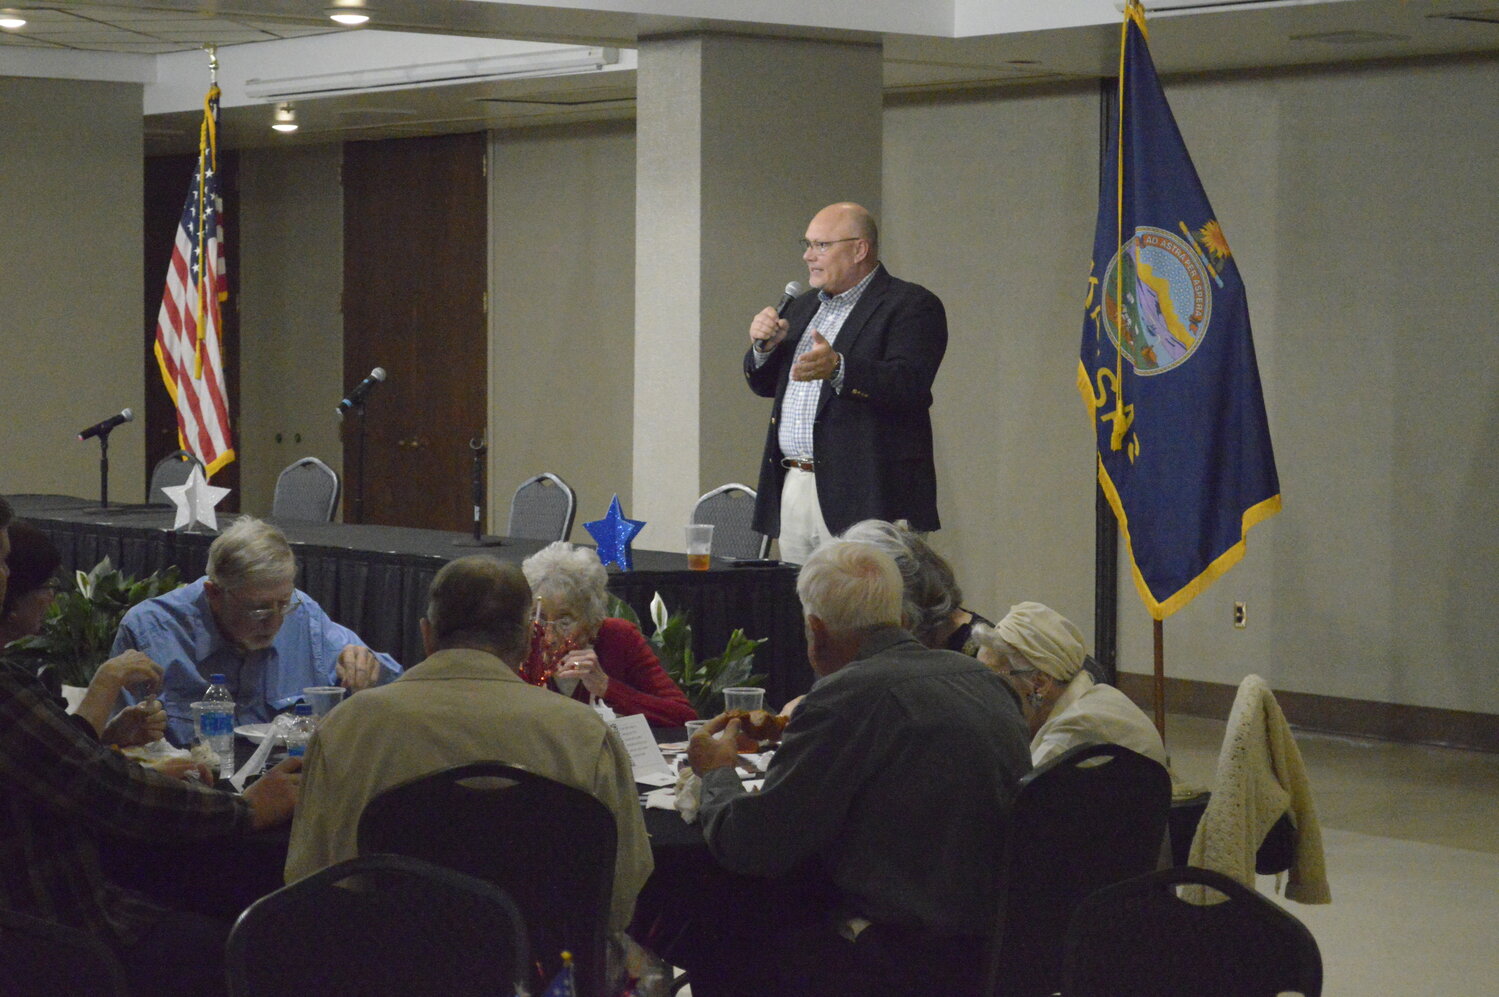 Mike Brown, chairman of the Kansas Republican Party, stressed the need for Republican candidates in local elections Saturday, May 20 at Pittsburg’s Memorial Auditorium.